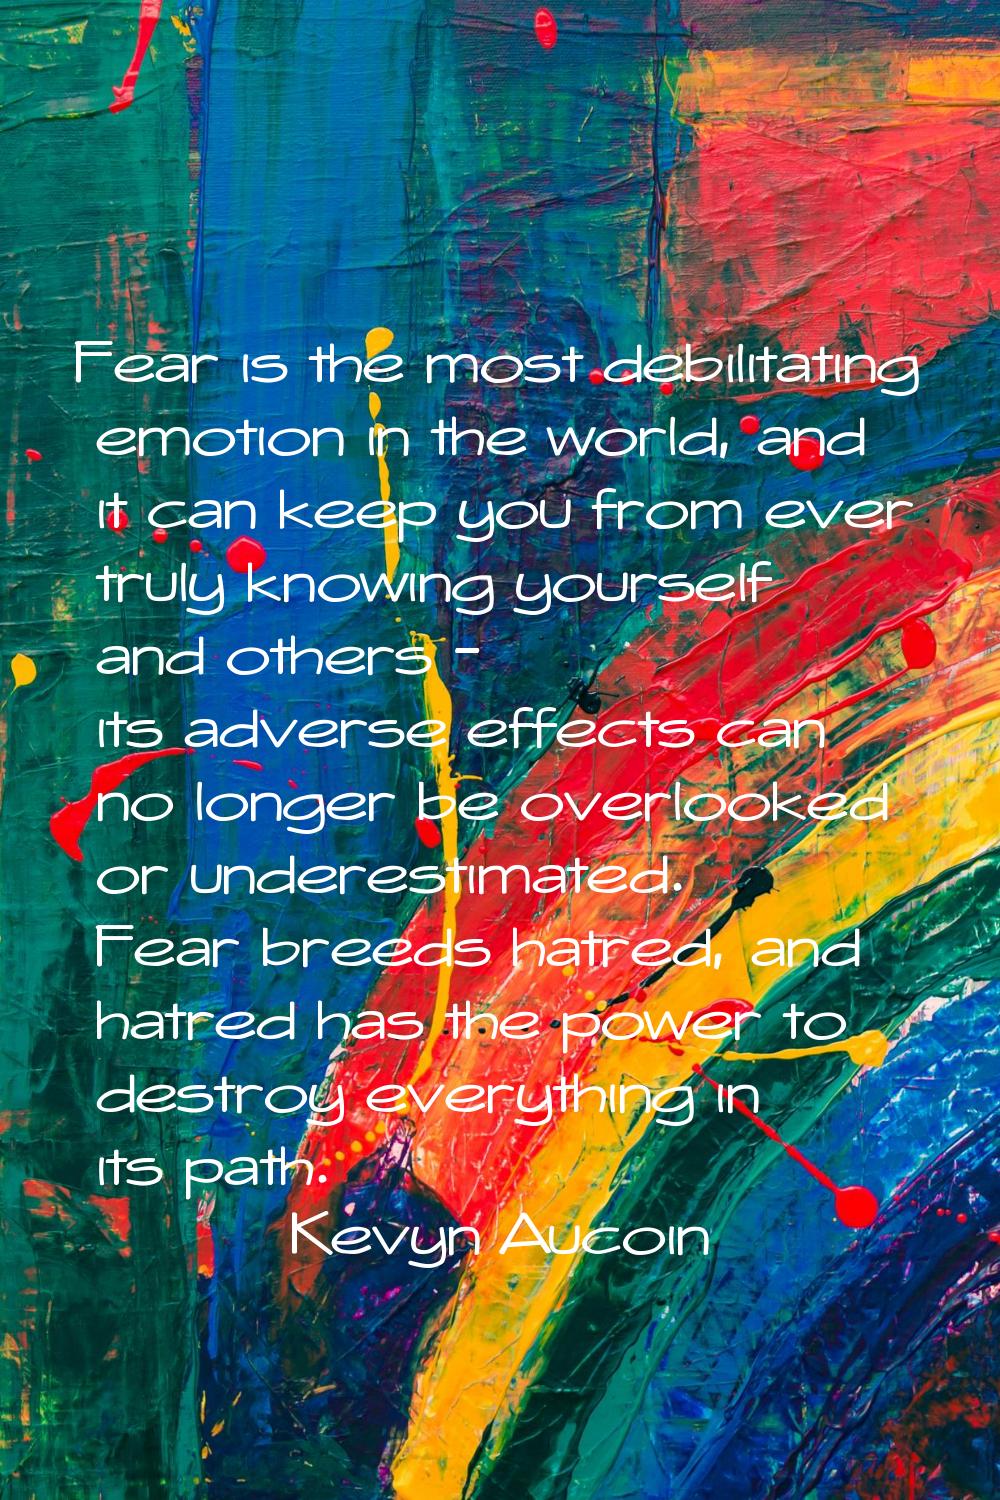 Fear is the most debilitating emotion in the world, and it can keep you from ever truly knowing you